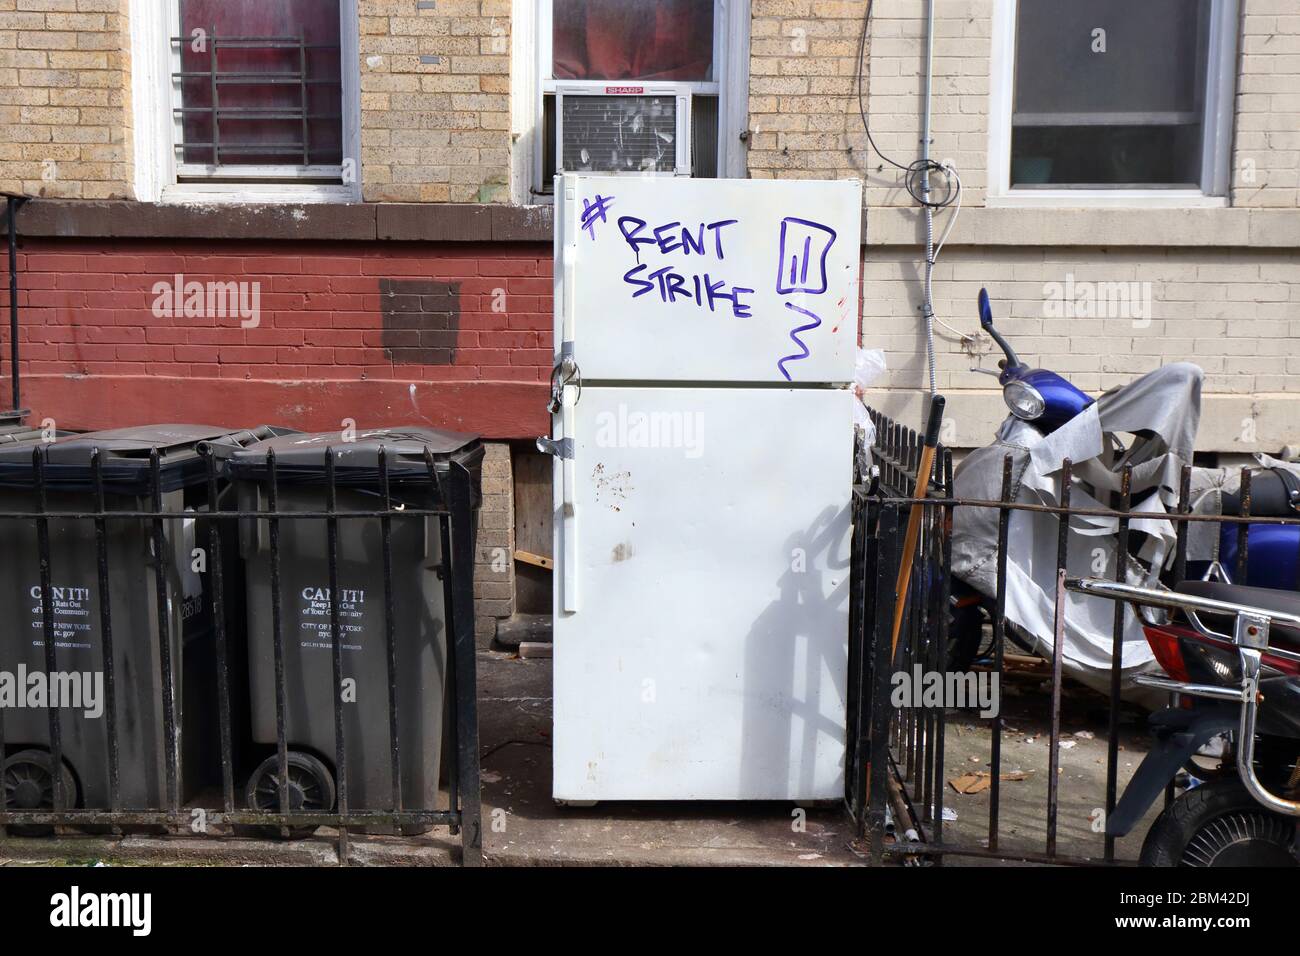 A Rent Strike hashtag on a refrigerator in Brooklyn, New York. Layoffs due to the coronavirus... SEE MORE INFO FOR FULL CAPTION Stock Photo